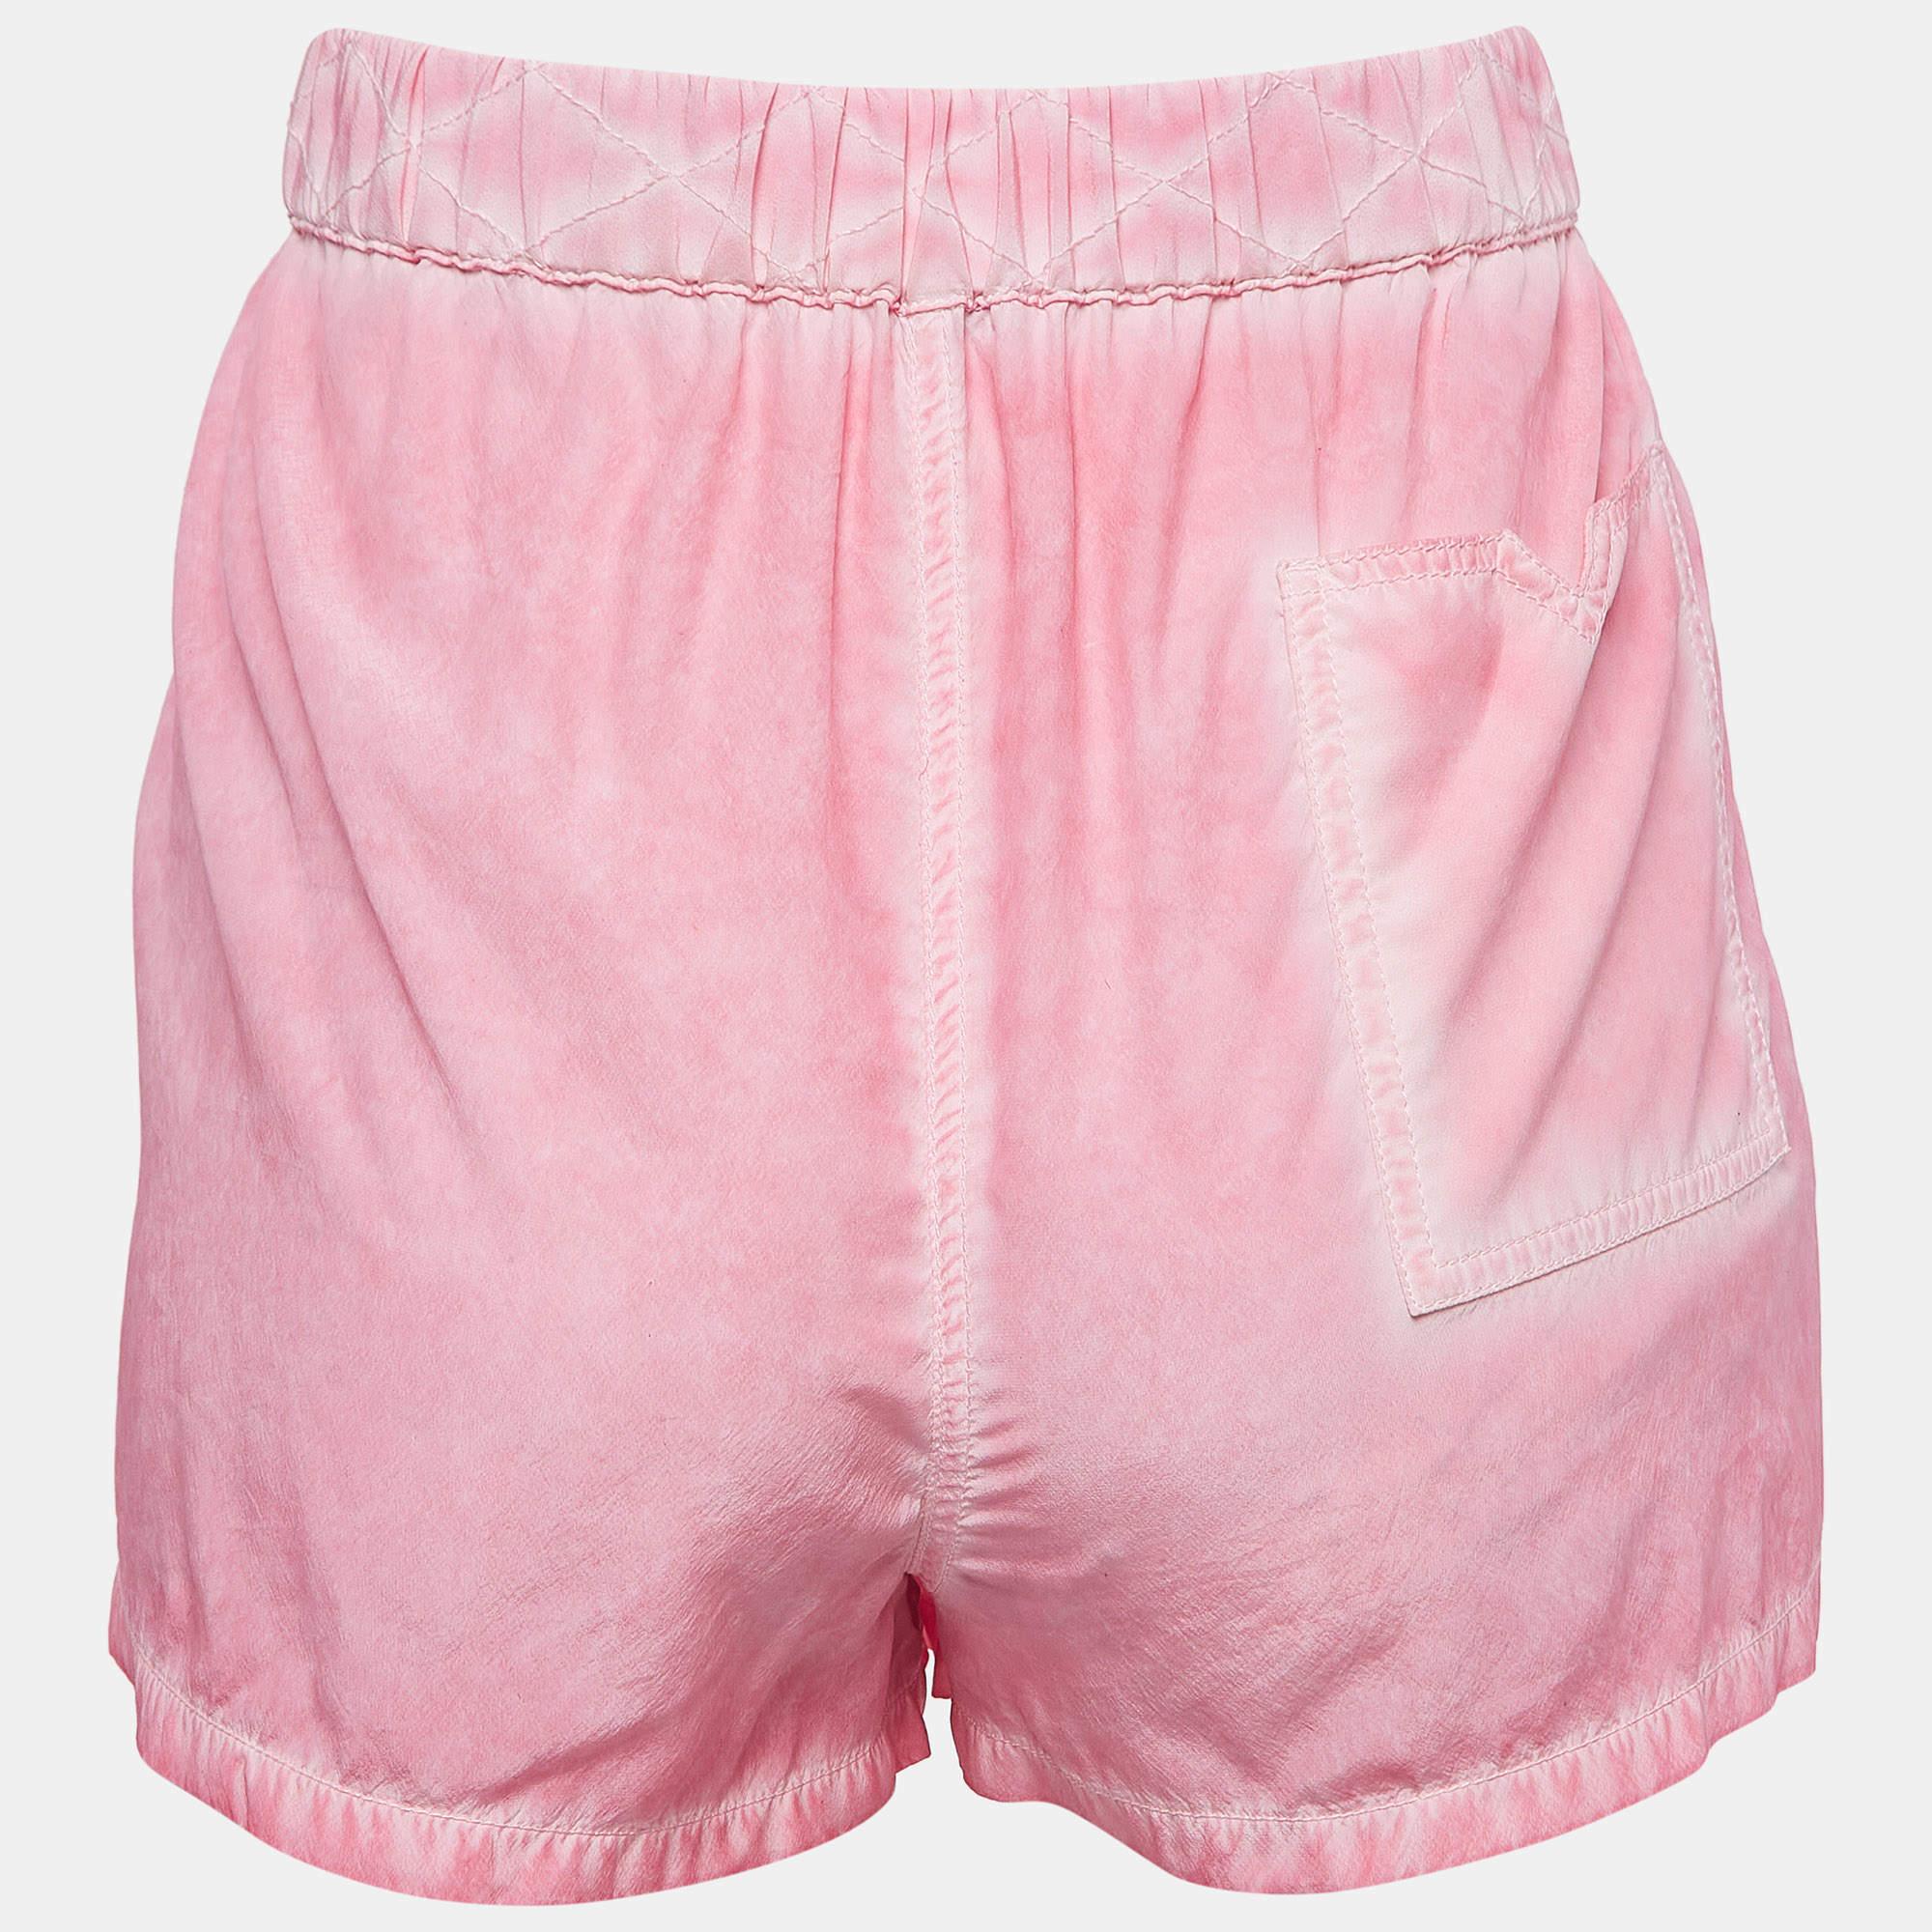 These shorts from Louis Vuitton are summer outfit goals! They flaunt a vibrant pink hue and are made from silk with belted design on waist accentuating the easy-breezy silhouette.

